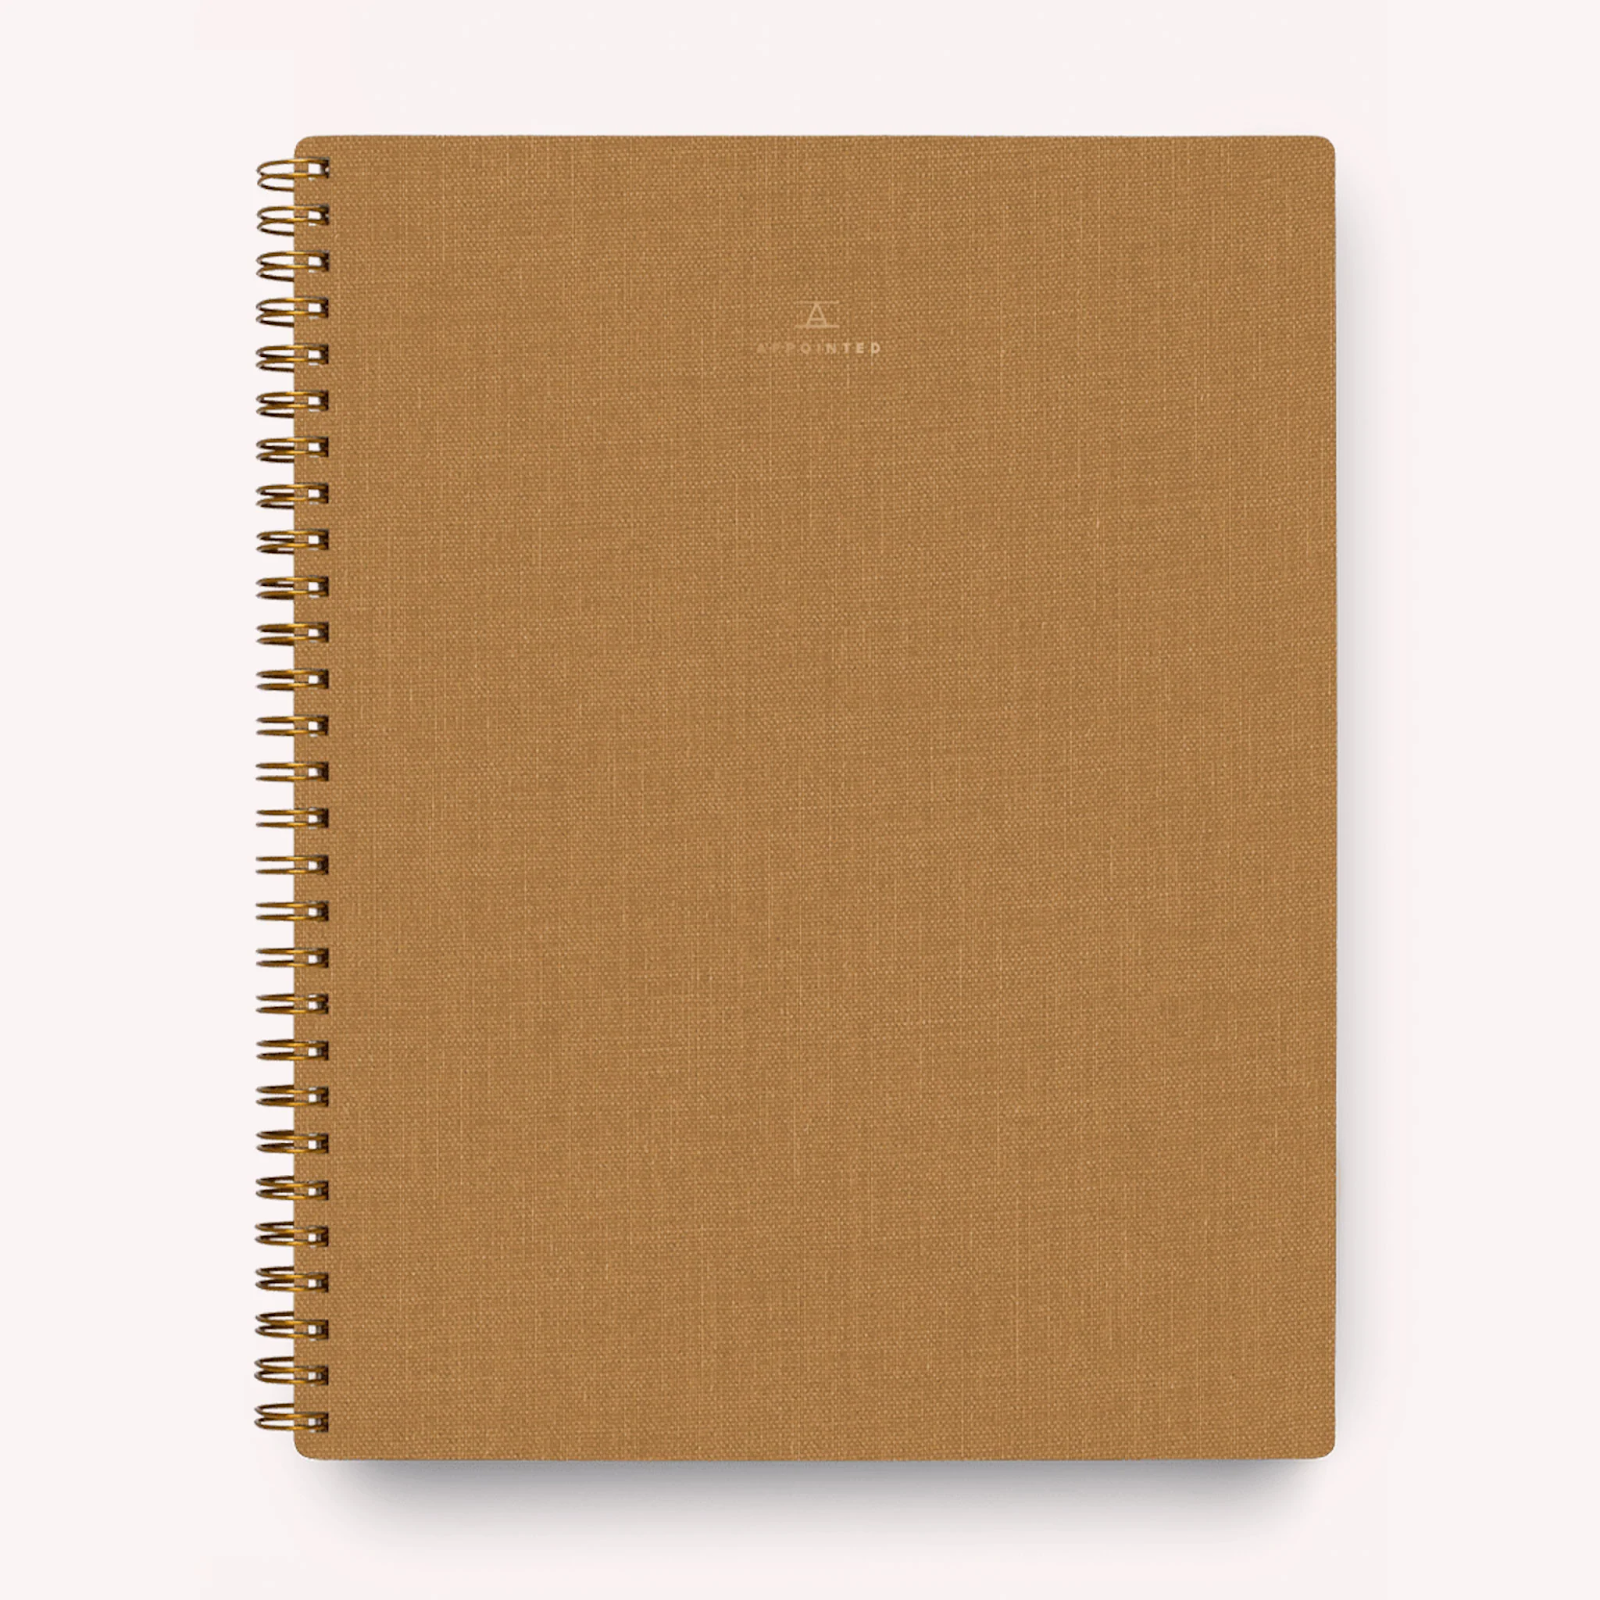 photo of a teak colored notebook